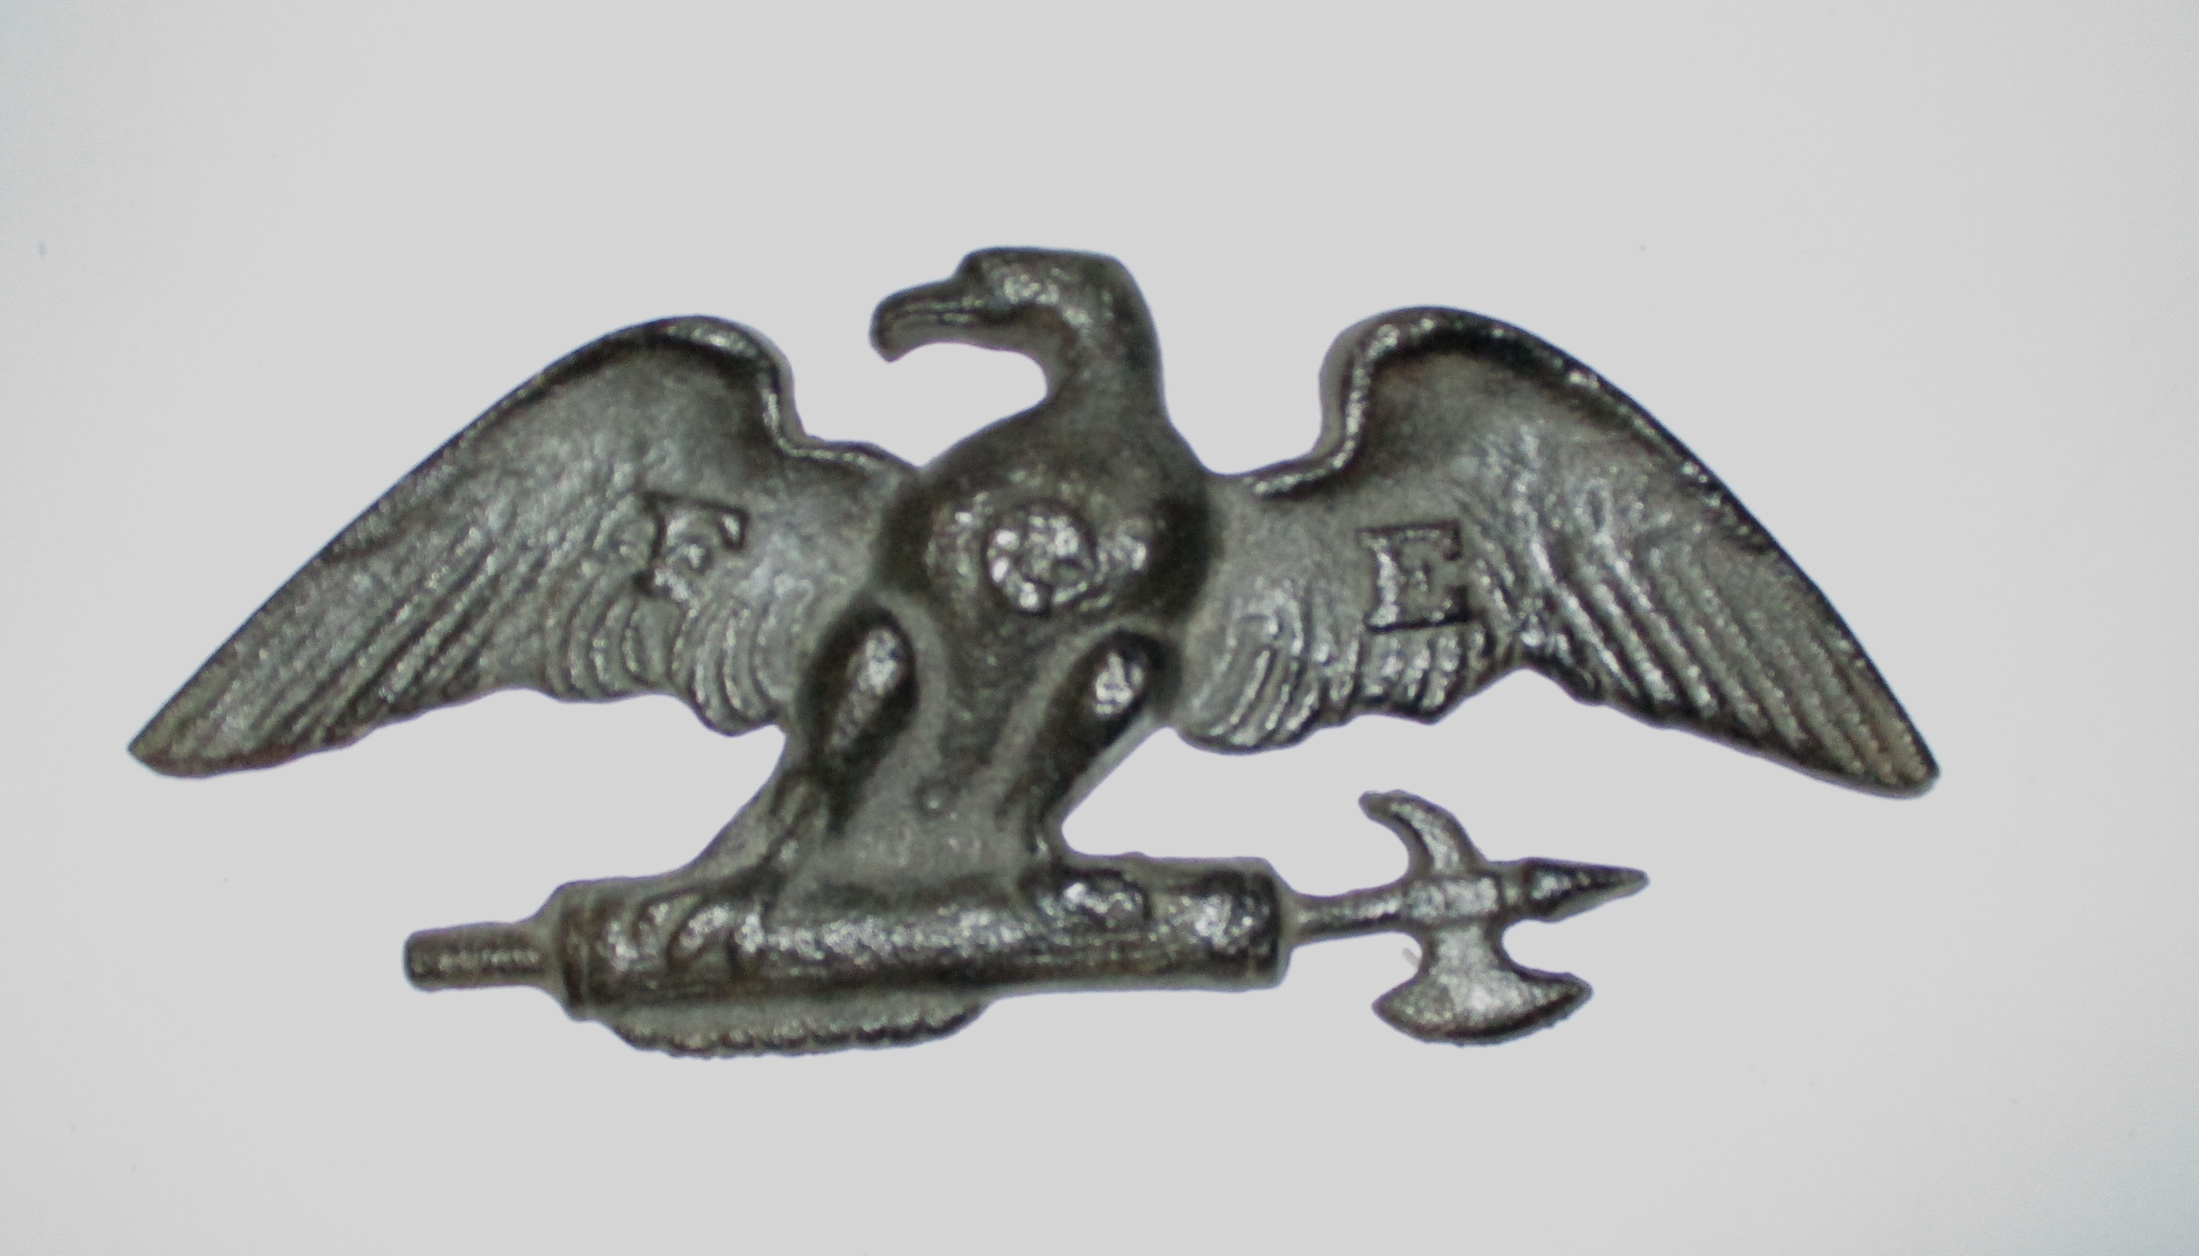 Cast Iron Fraternal Order of Eagles (FOE) plaque